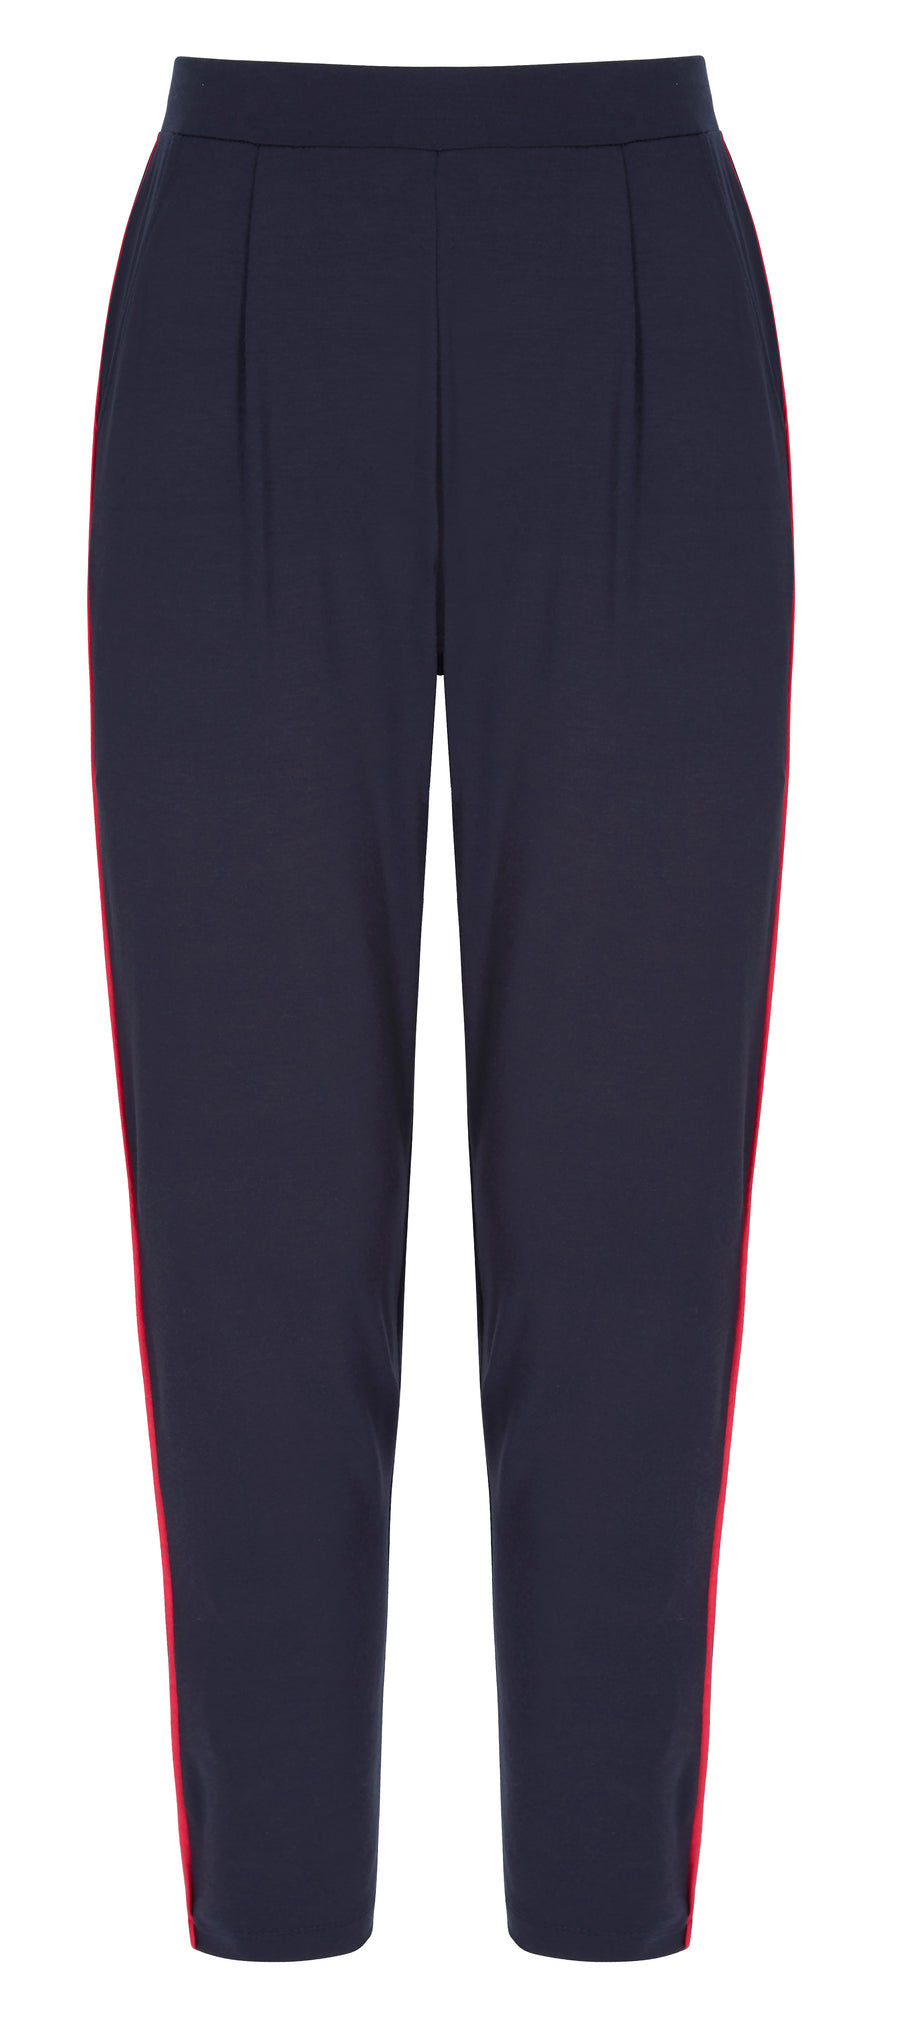 Divine Pants - Navy, Sunset Pink - Asquith